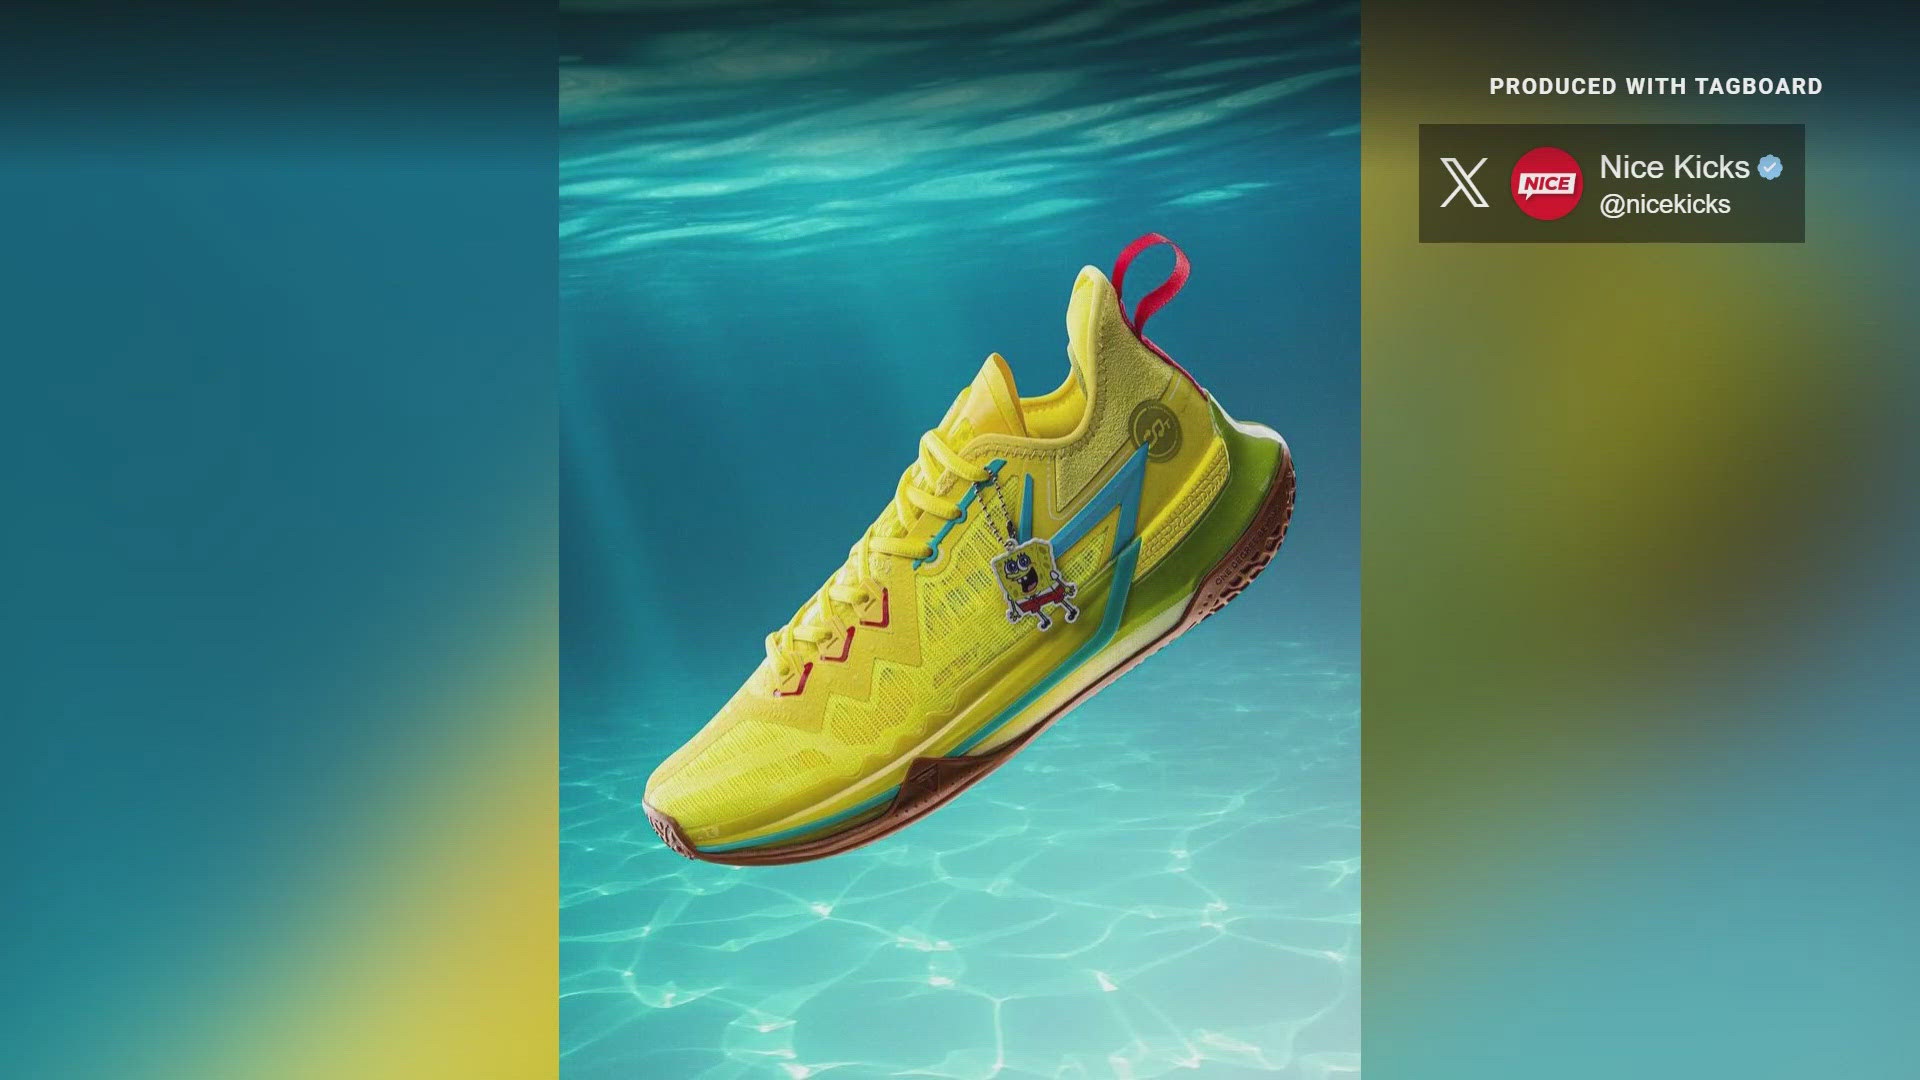 The Joker is launching an official Spongebob Squarepants-inspired shoe collection with a company called, 361 degrees.